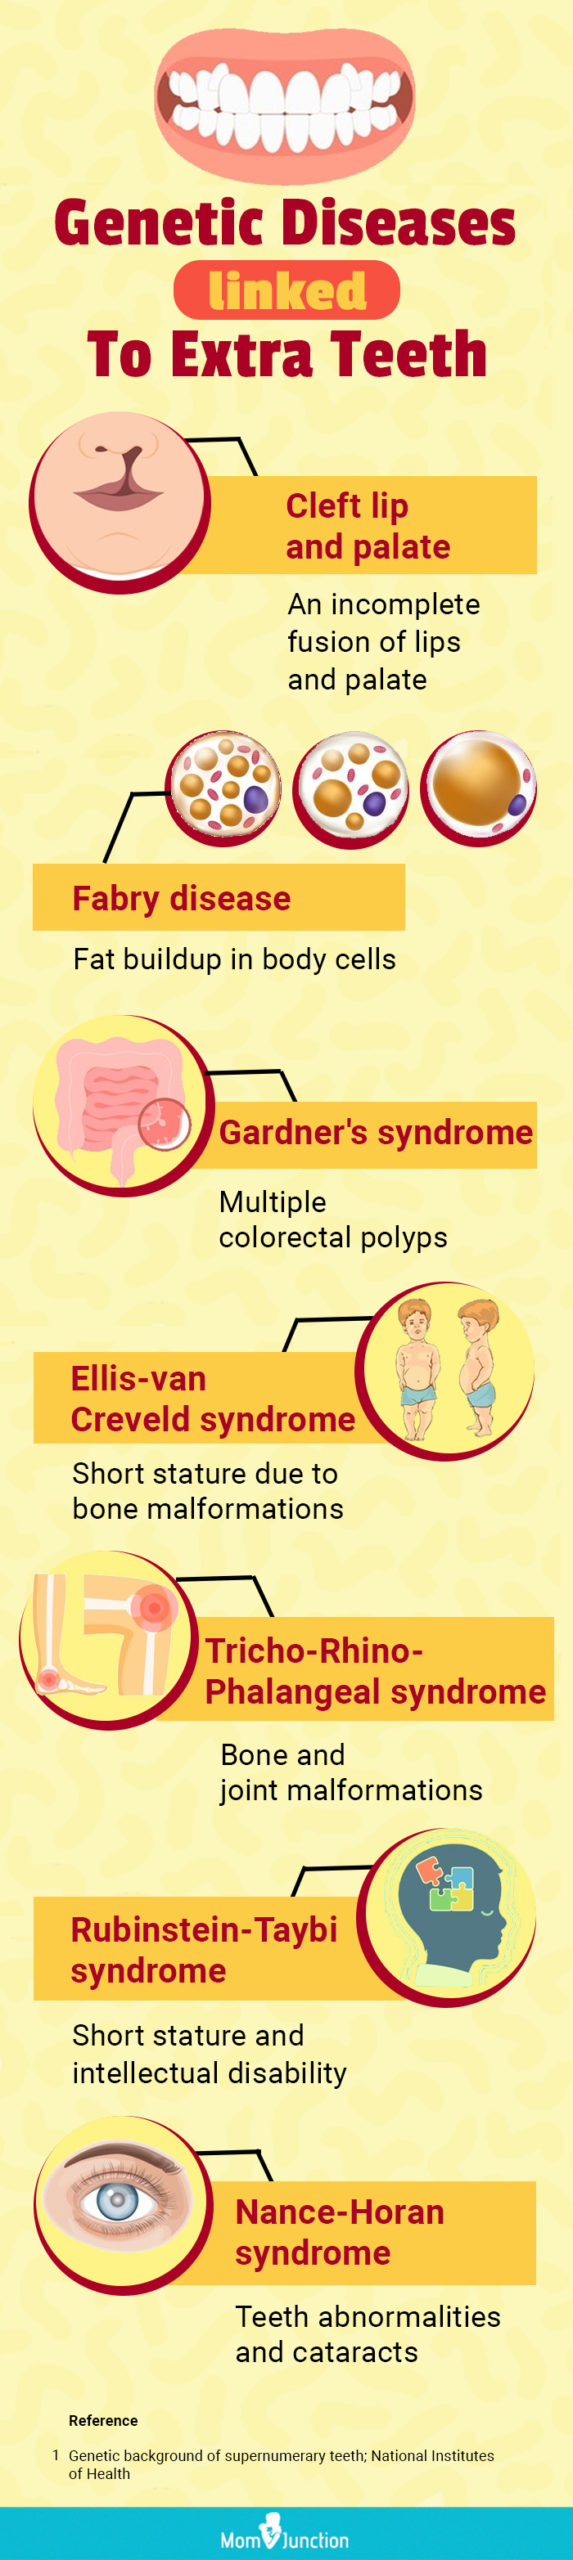 genetic diseases linked to extra teeth [infographic]